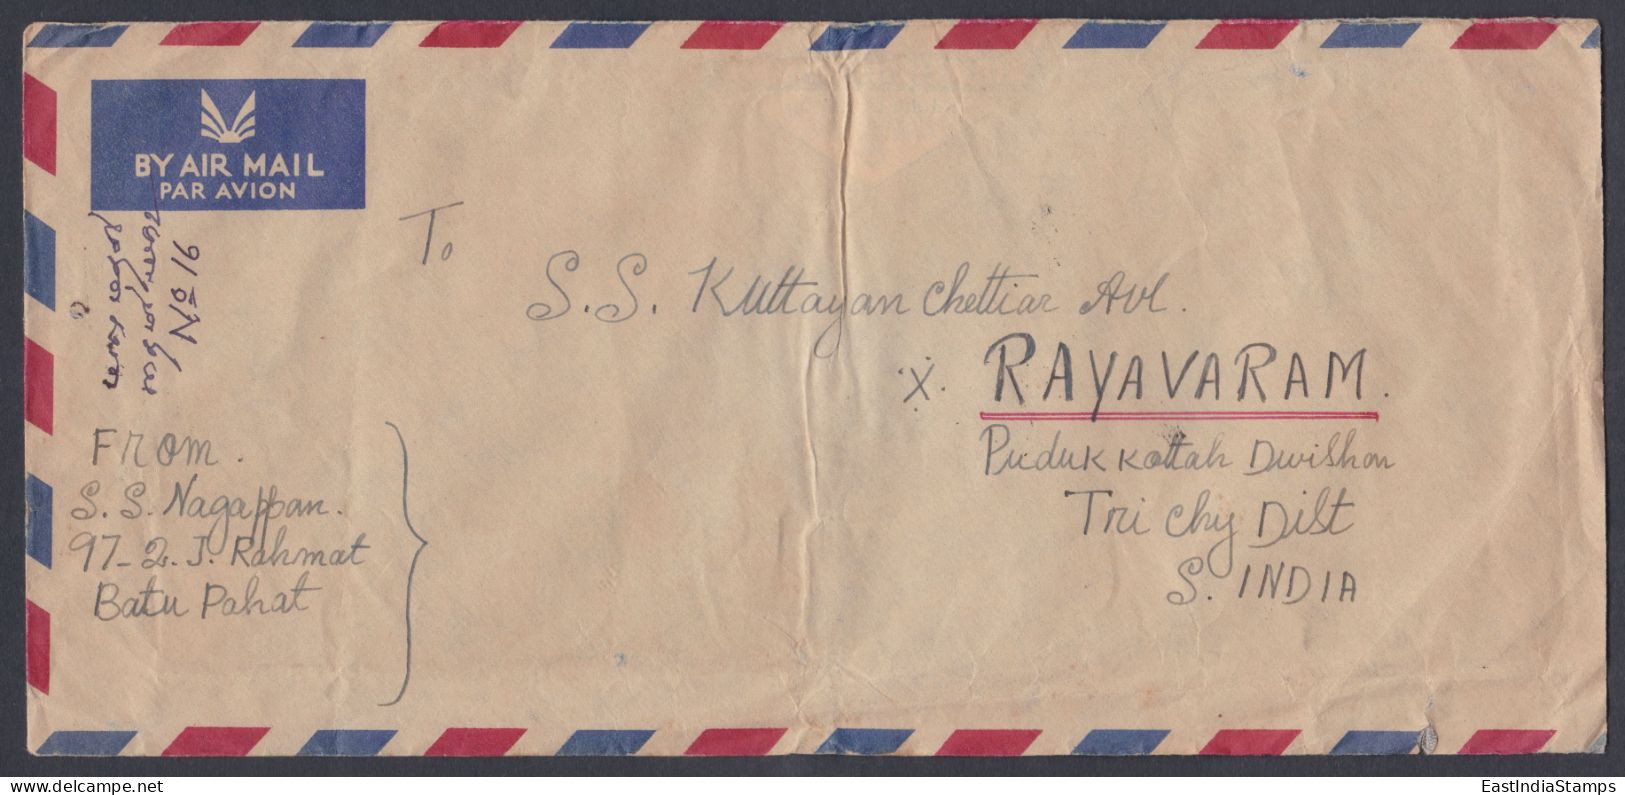 Malaya Johore 1956 Used Airmail Cover To India, Palm Tree, Stamps - Johore